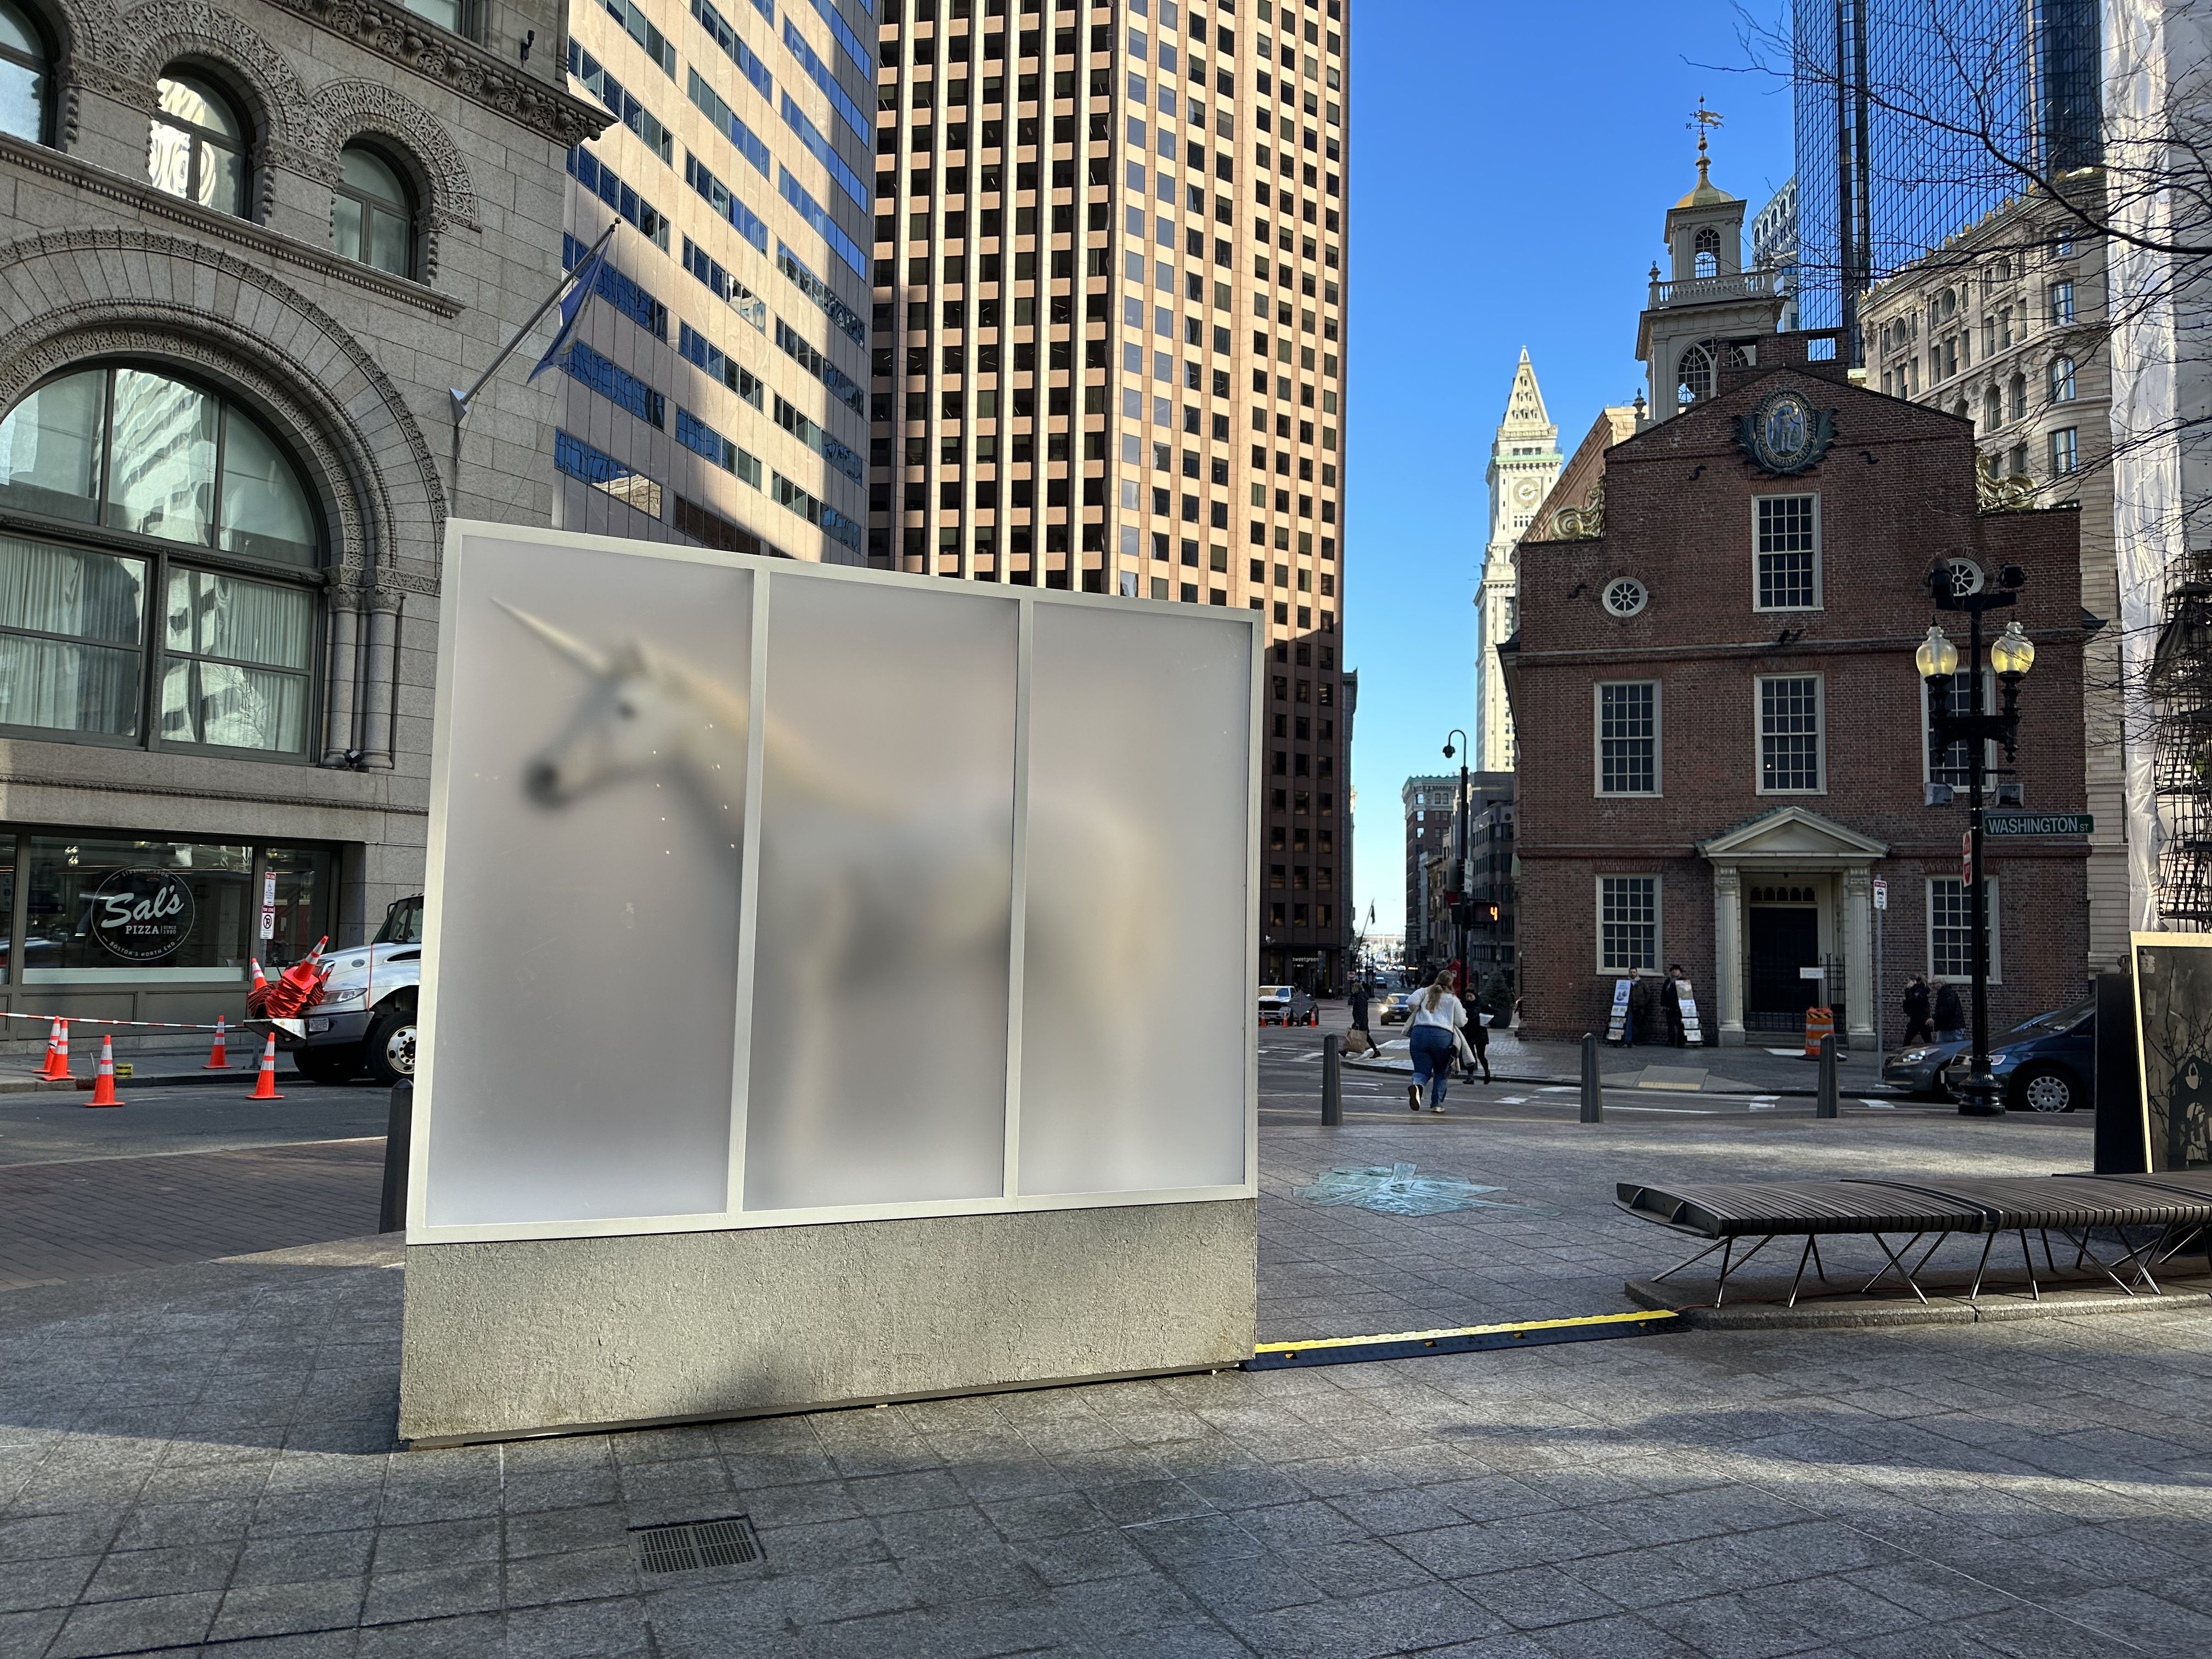 A sculpture of a unicorn sits inside a frosted glass case outside the old State House.